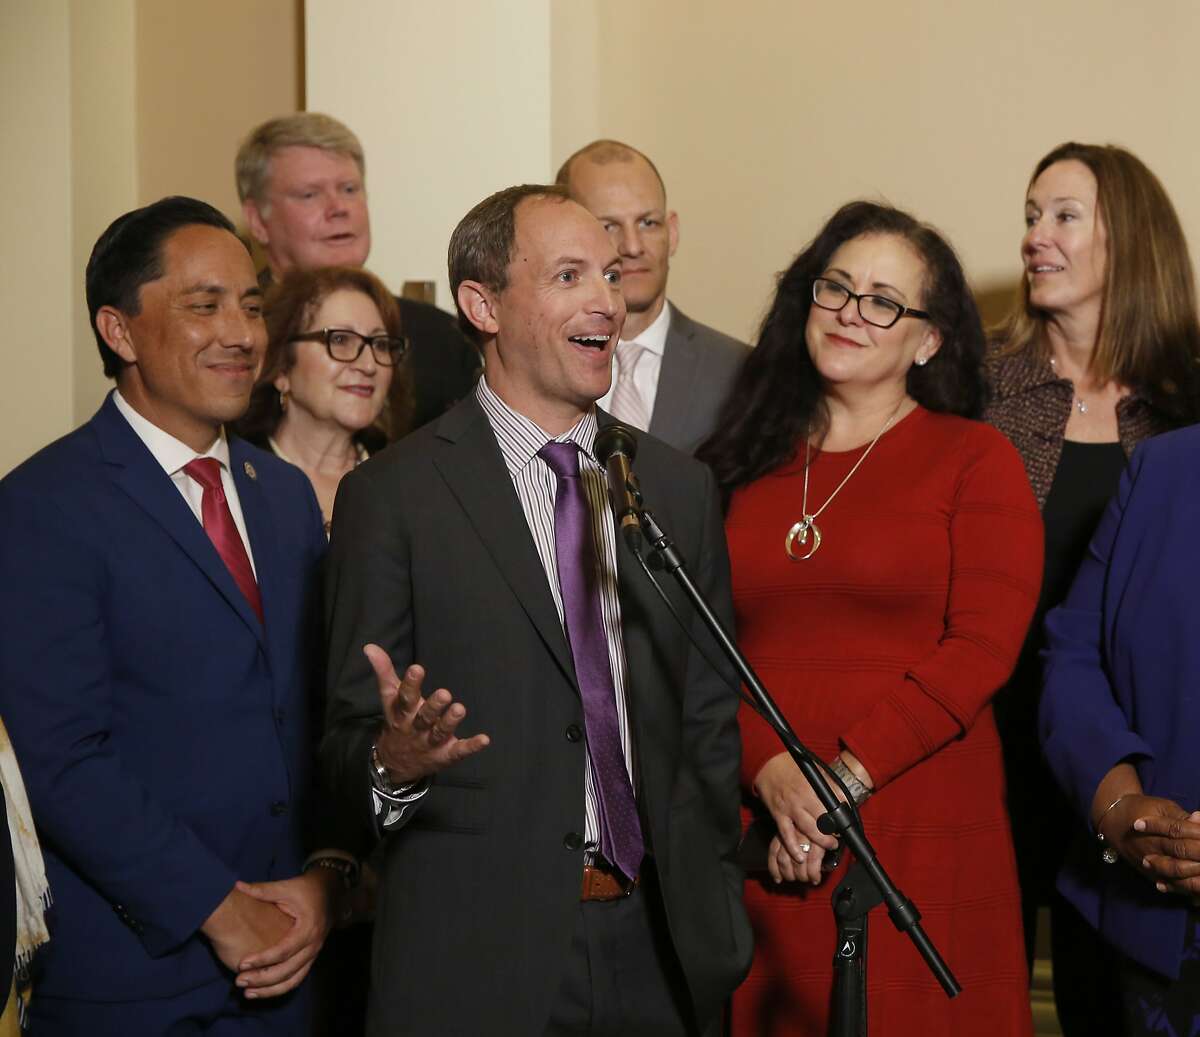 Assemblyman Brian Maienschein, center, discusses his decision to switch party registration from Republican to Democrat at a news conference, Thursday, Jan. 24, 2019, in Sacramento, Calif. Maienschein was flanked by Democratic Assembly members, from left, including Todd Gloria of San Diego, Eloise Gomez Reyes, of San Bernardino, Mark Stone of Scotts Valley, Kevin McCarty of Sacramento, Lorena Gonzalez Fletcher of San Diego and Jacqui Irwin, of Thousand Oaks. (AP Photo/Rich Pedroncelli)